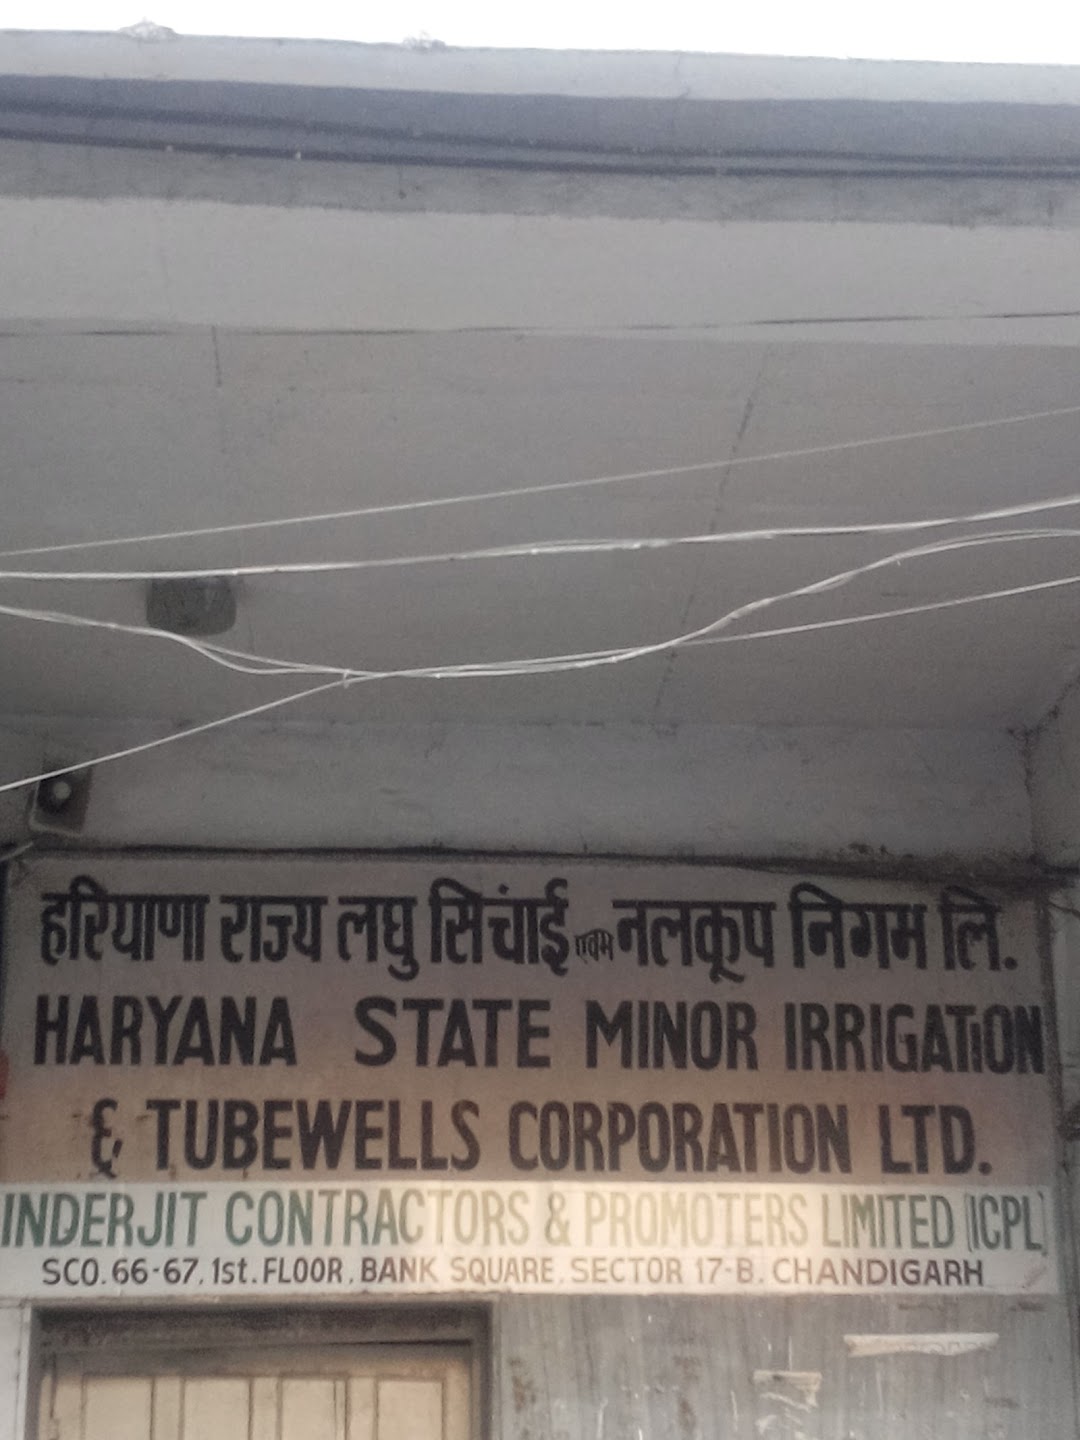 Haryana State Minor Irrigation & Tubewells Corporation Limited - Inderjit Contractors & Promoters Limited